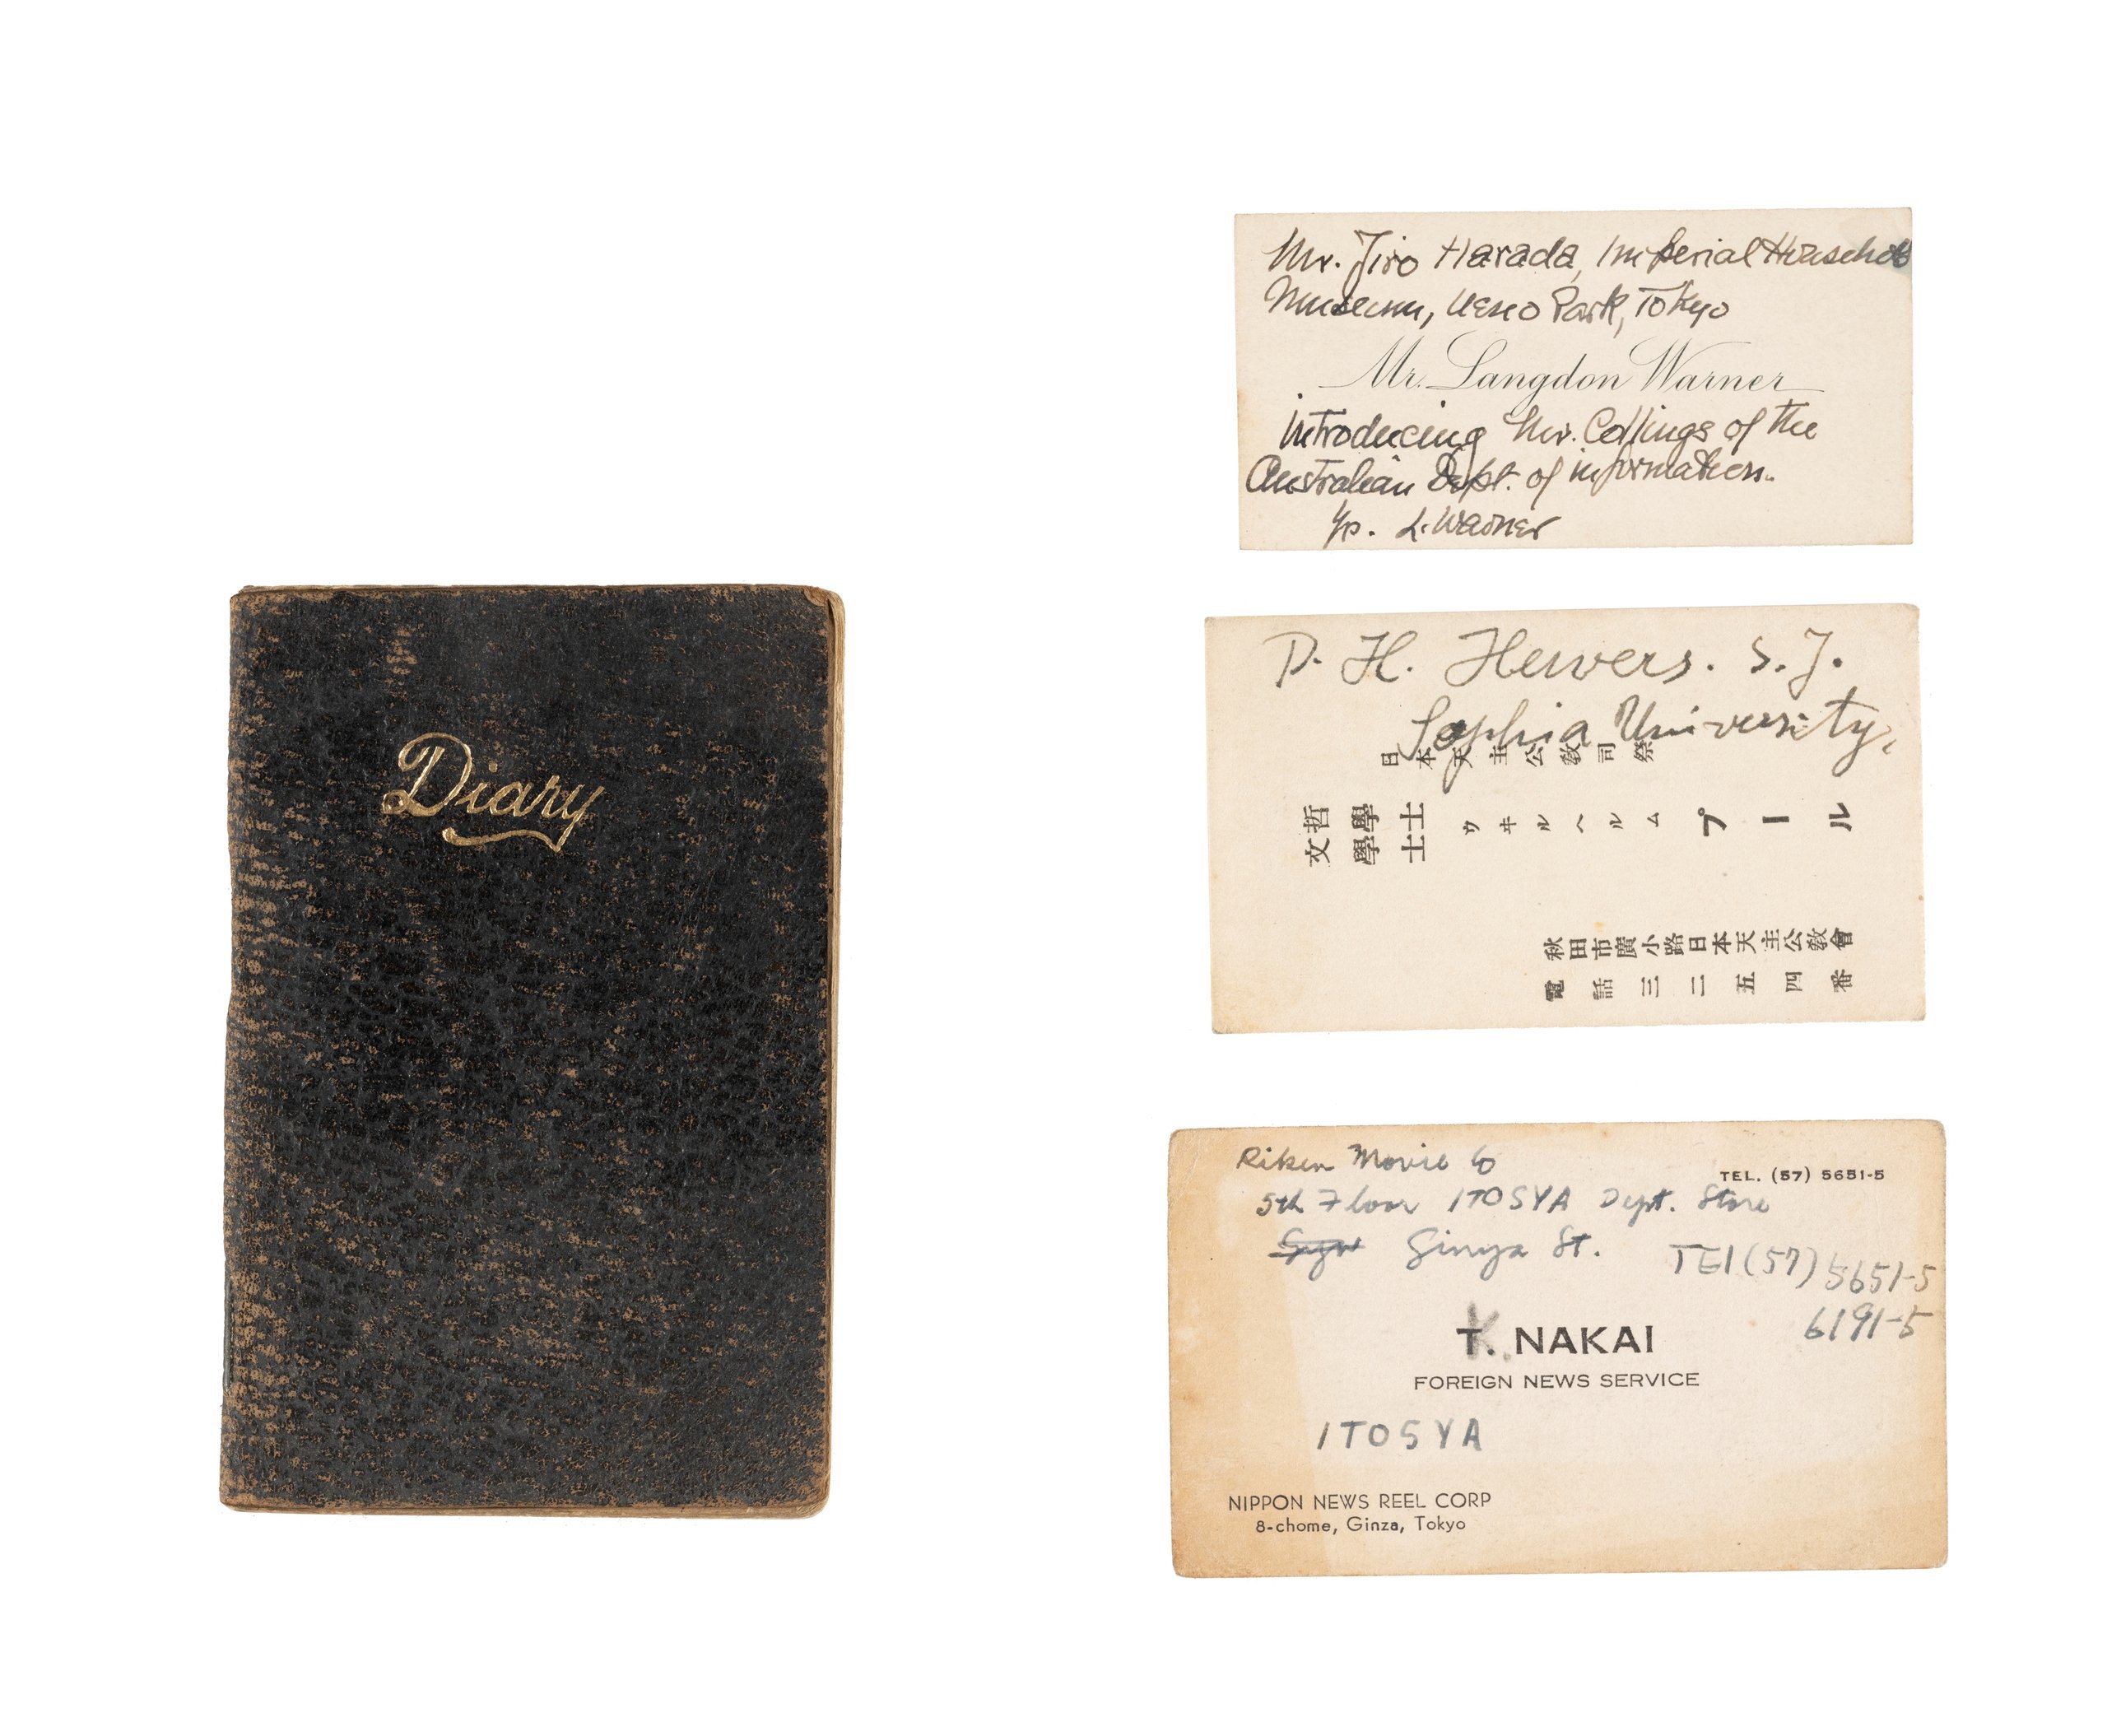 Diary and business cards belonging to Geoffrey Collings